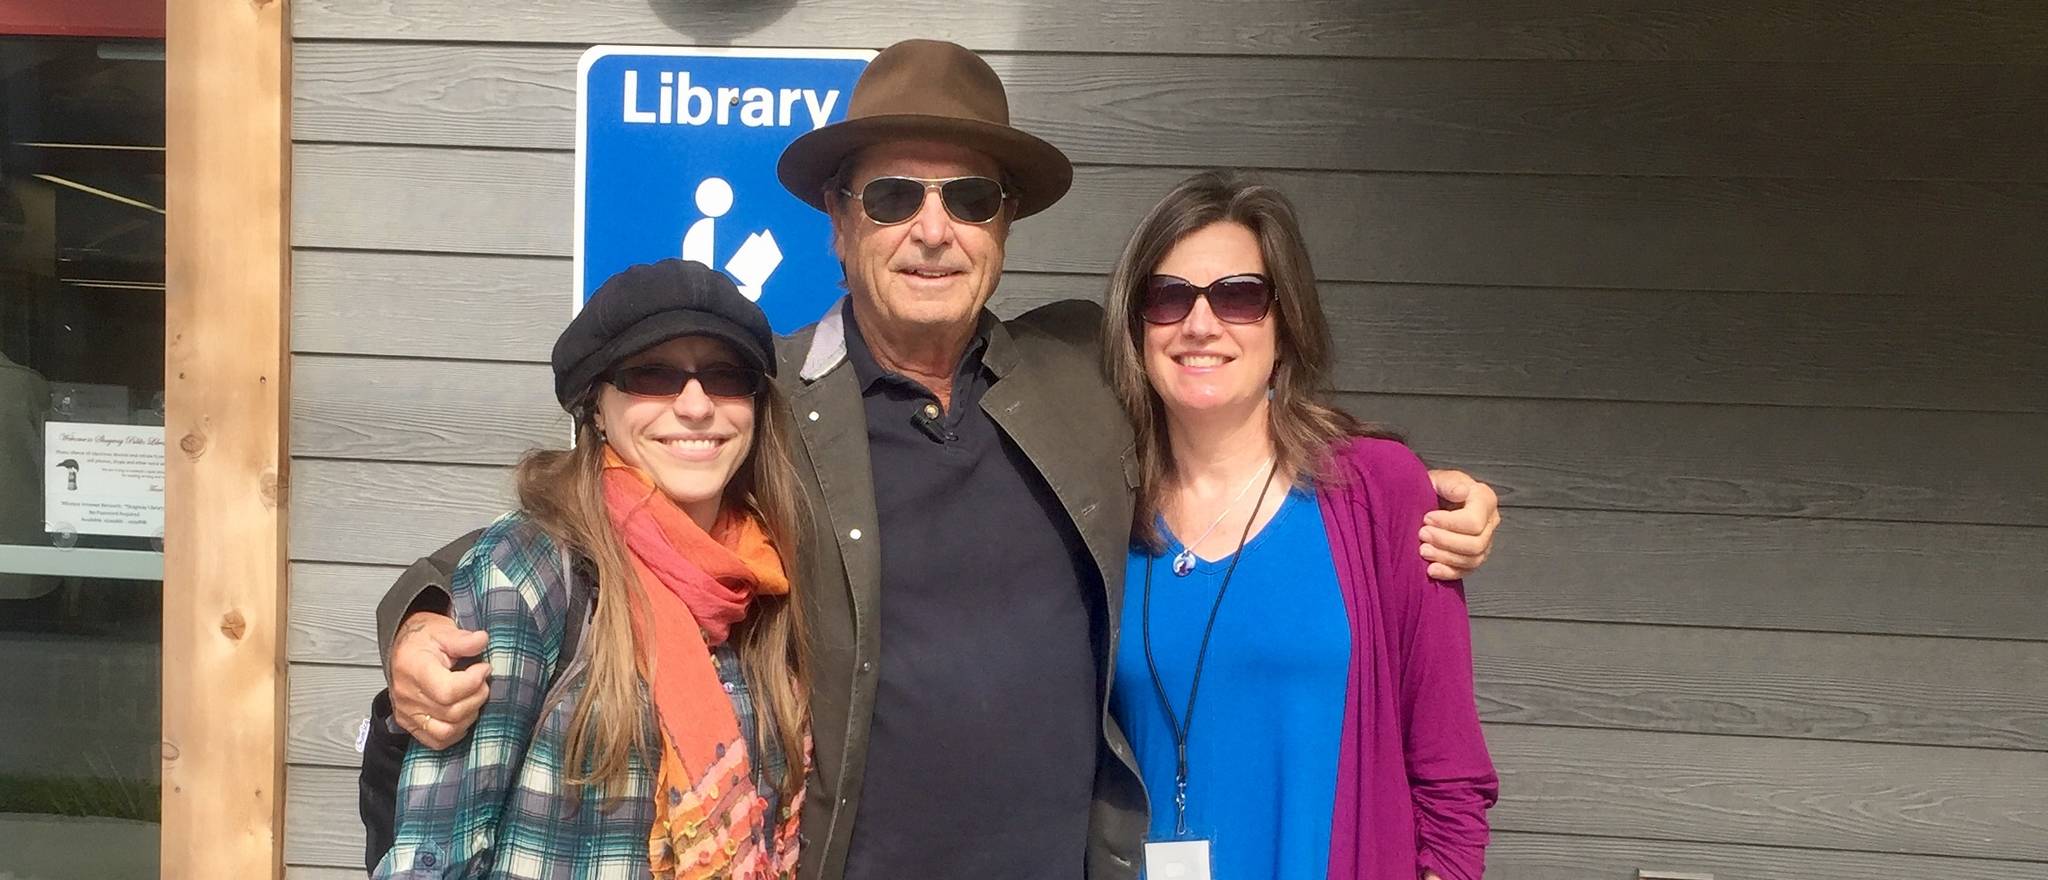 Paul Theroux, Katie Bausler and Amy O’Neill Houck pose together. Image courtesy of Katie Bausler.